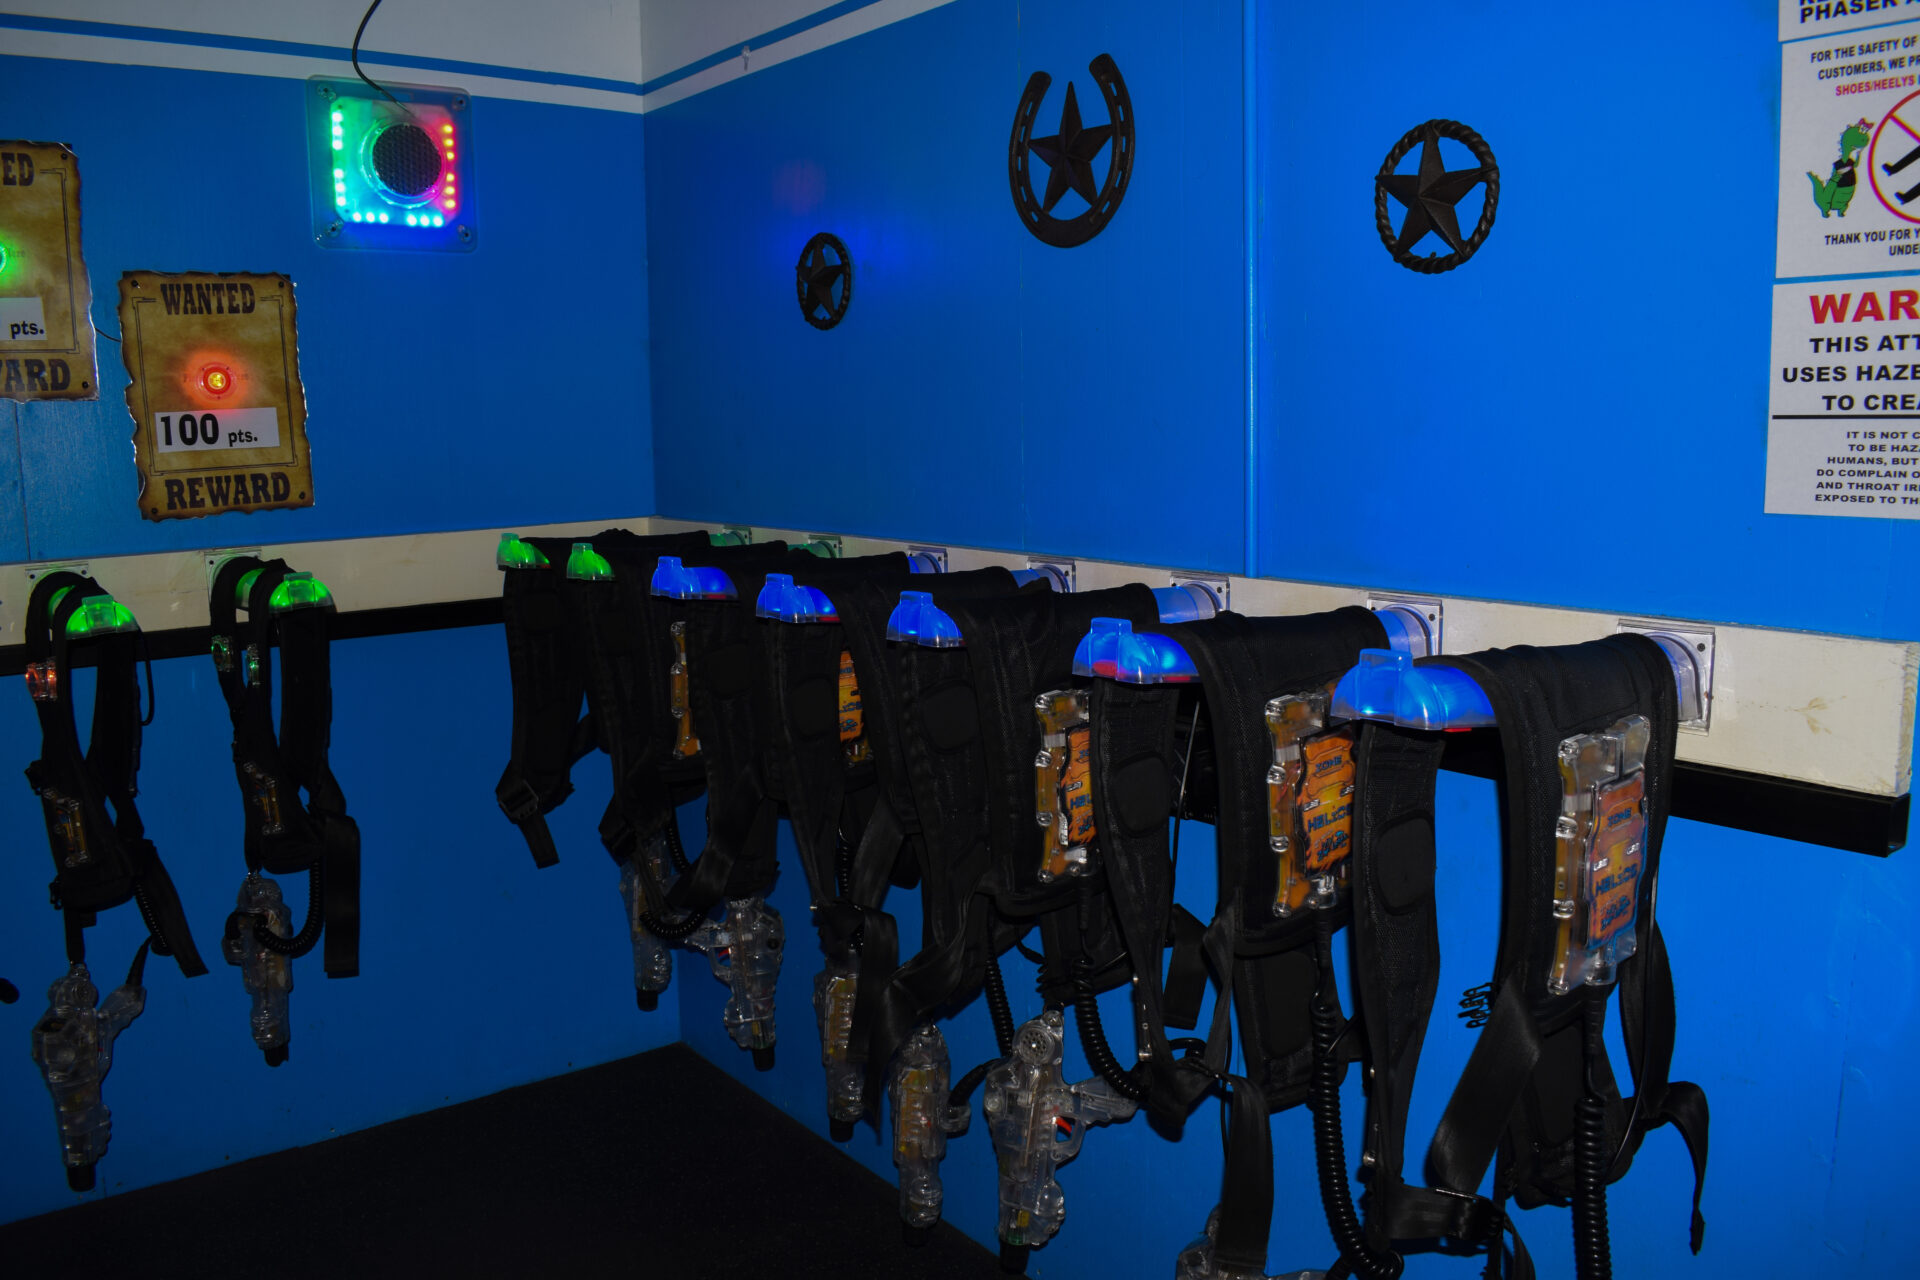 Laser tag station with laser guns and jackets| Go-kart Raceway